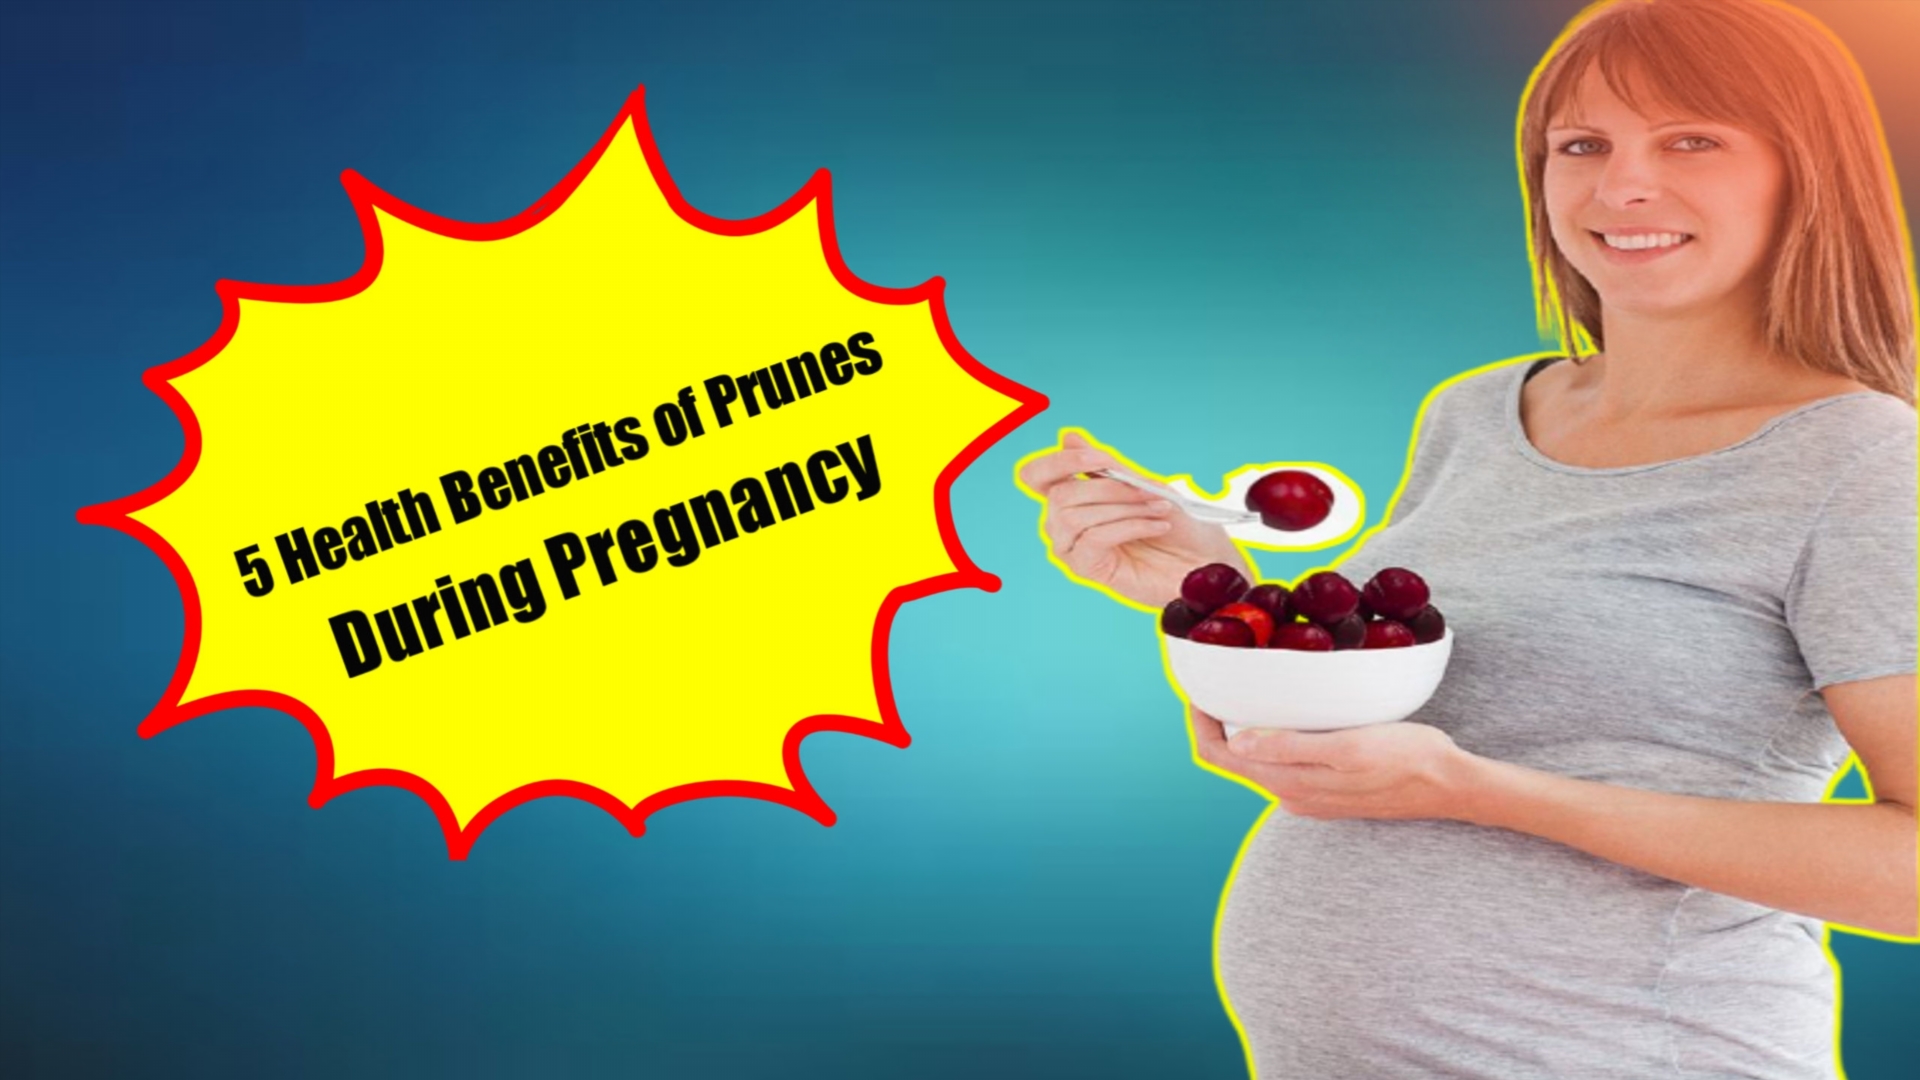 prunes during pregnancy guide